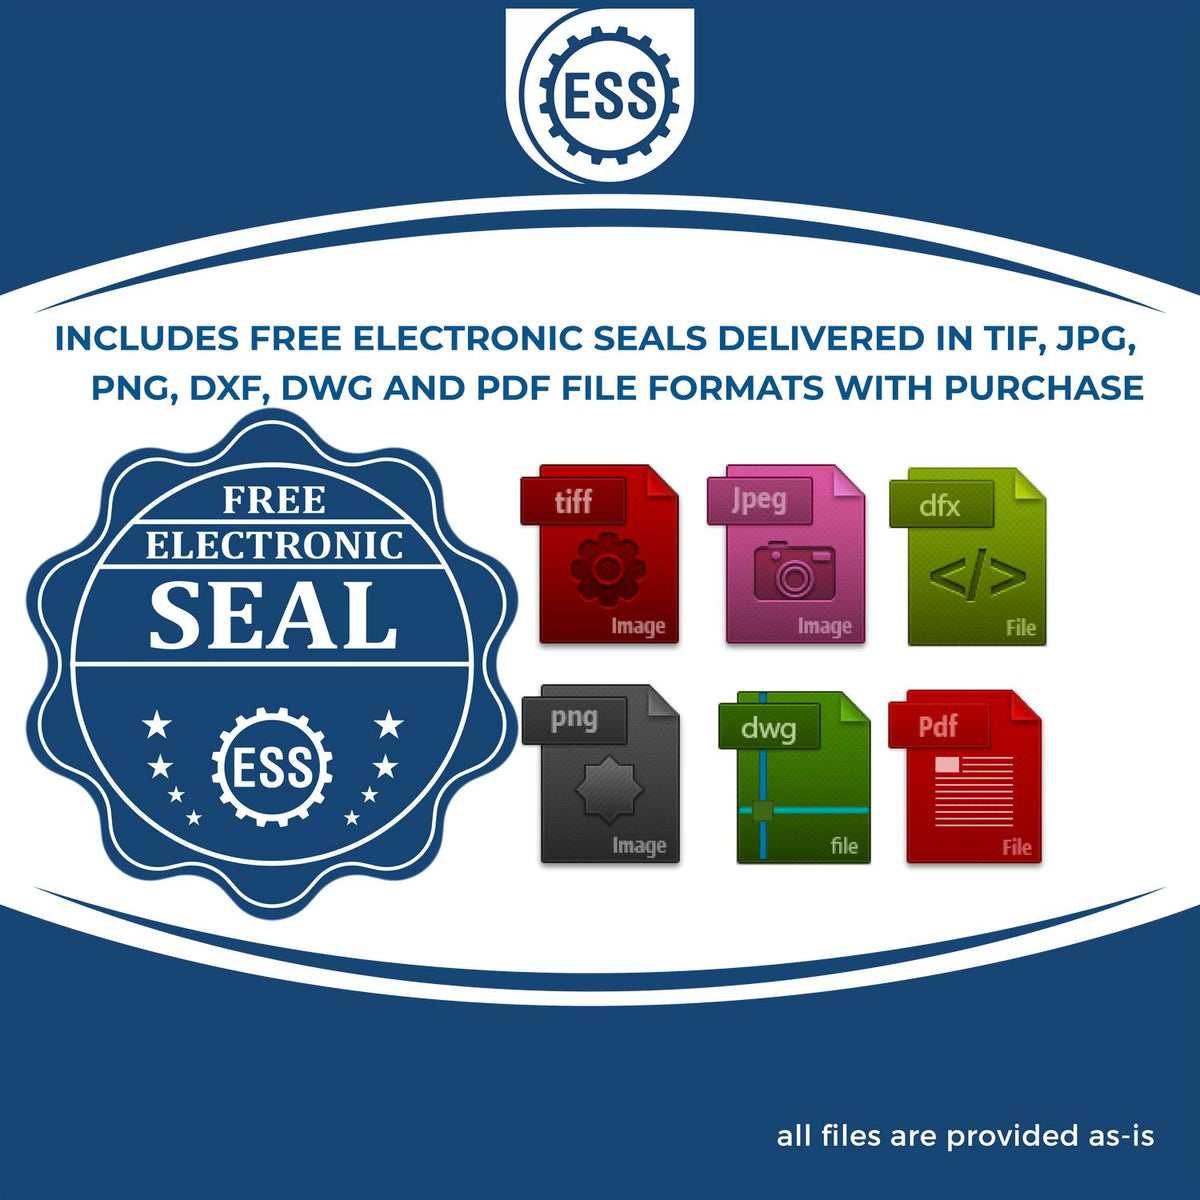 An infographic for the free electronic seal for the Handheld Delaware Professional Engineer Embosser illustrating the different file type icons such as DXF, DWG, TIF, JPG and PNG.